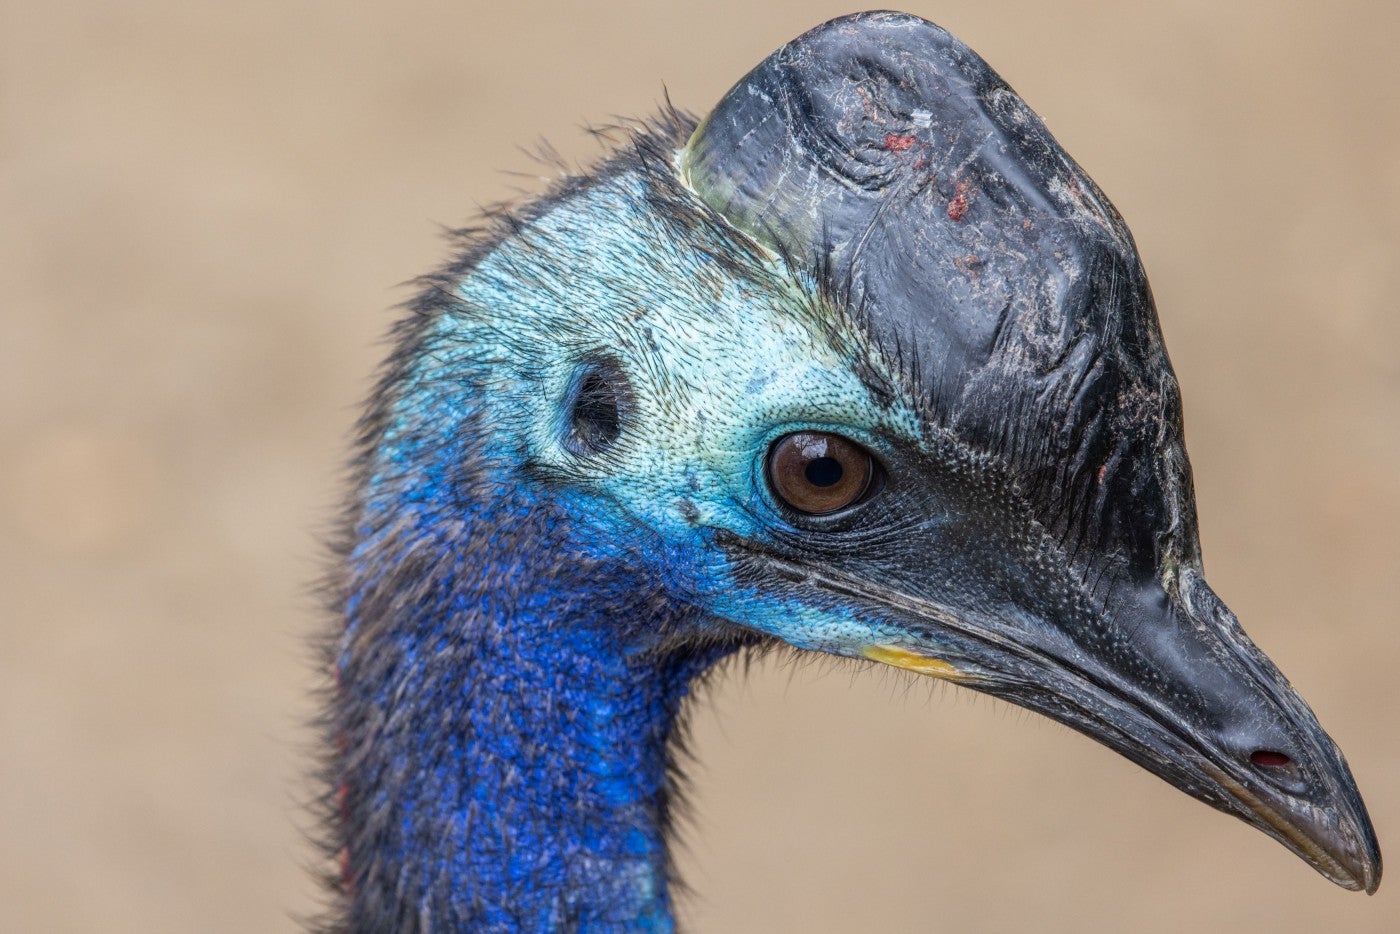 Close-up of a southern cassowary's face and casque.